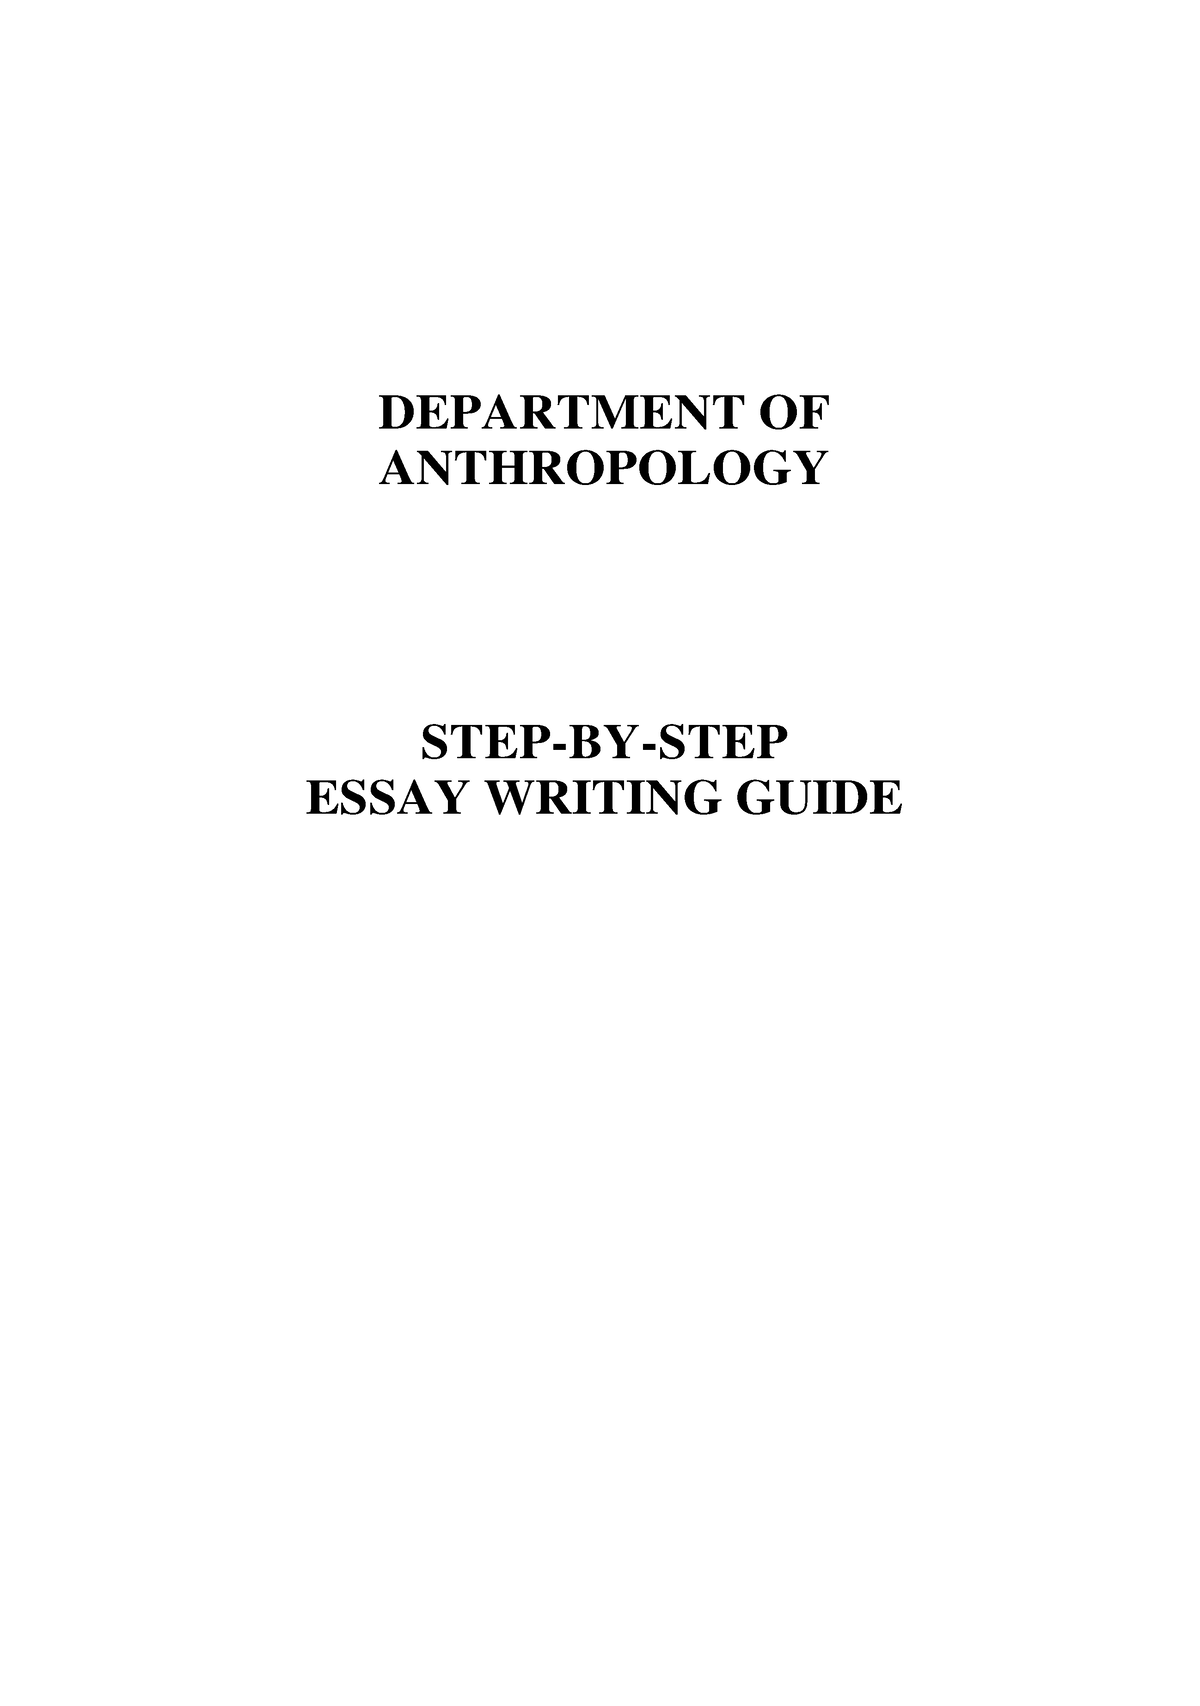 essay example of anthropology